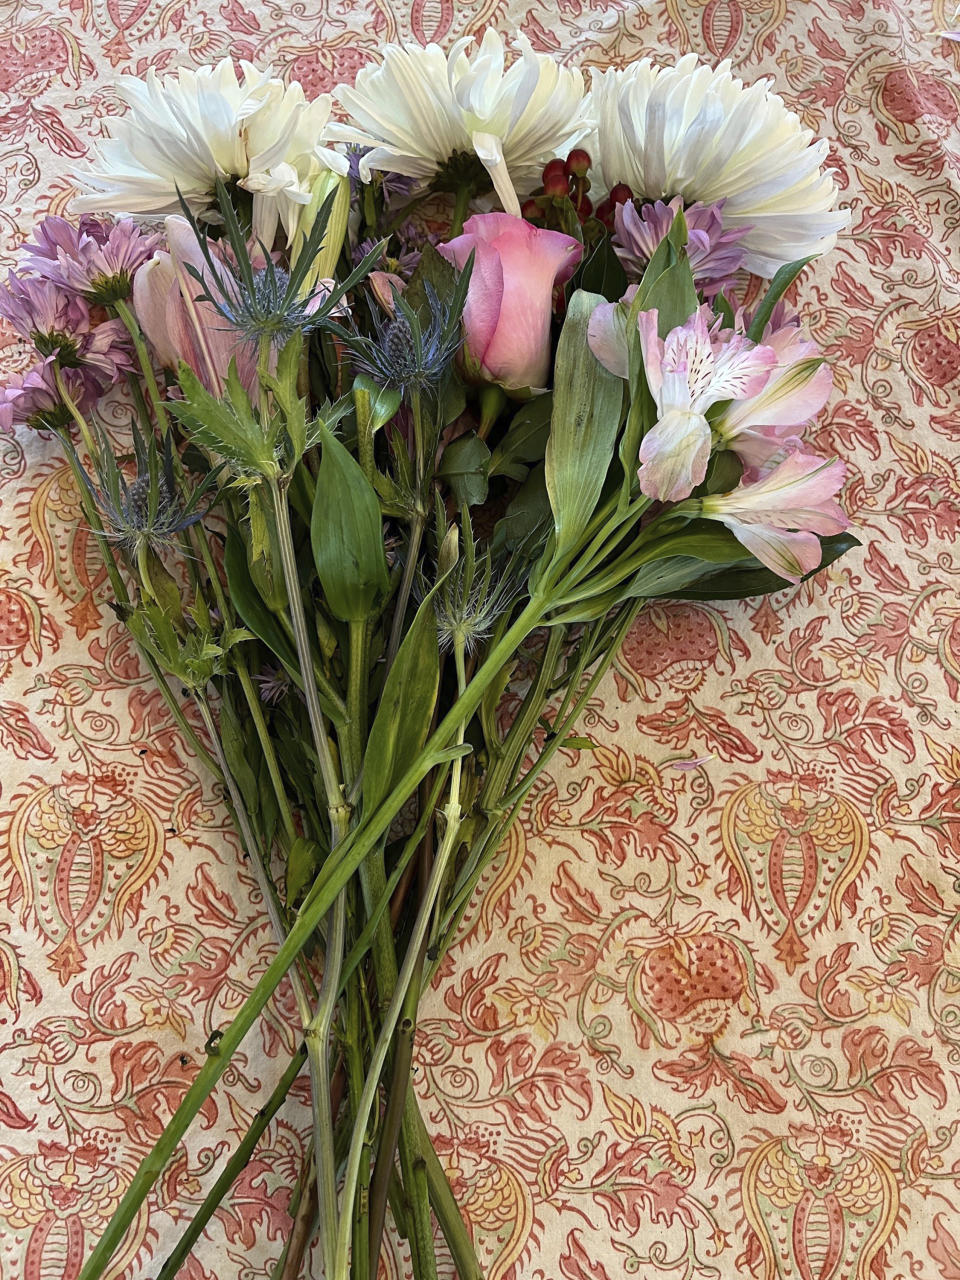 This May 1, 2024 image provided by Jessica Damiano shows a supermarket bouquet of three white chrysanthemums, a lily stem and a single rose embellished with greenery and "filler" flowers on Long Island, New York. Placing flowers in a decorative pitcher or vase is one way to elevate a floral arrangement. (Jessica Damiano via AP)